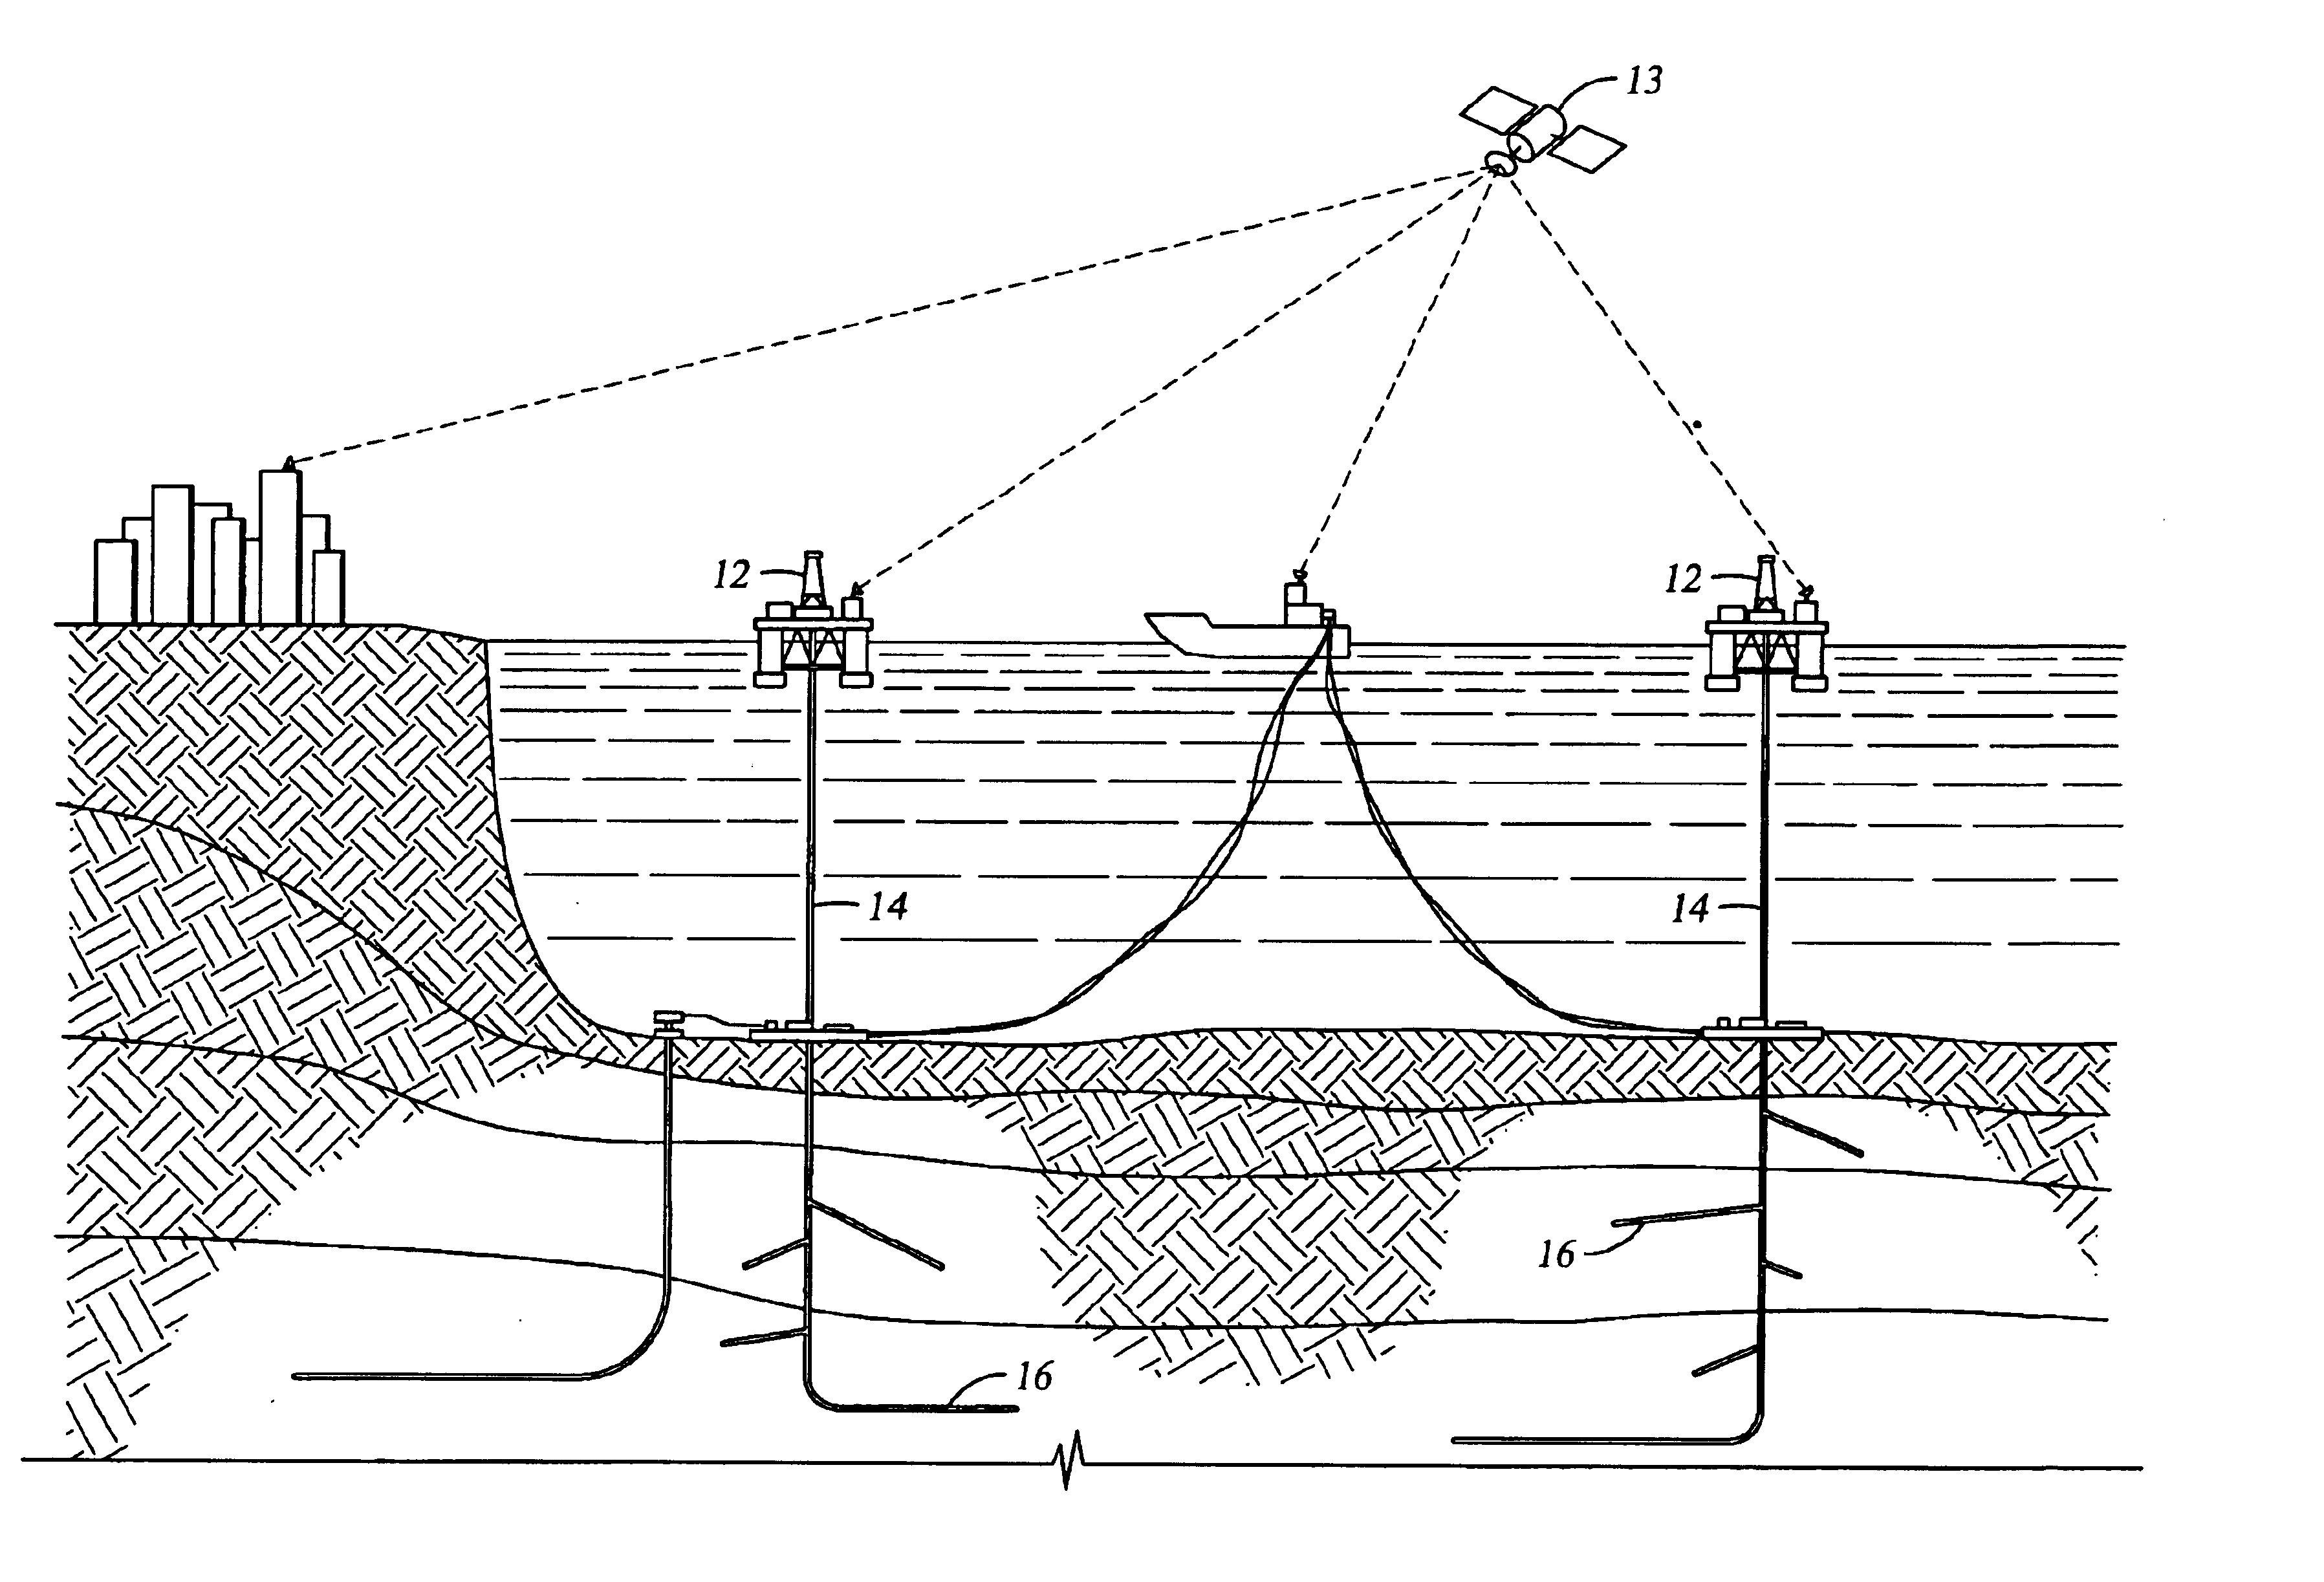 Methods and apparatus for monitoring and controlling oil and gas production wells from a remote location